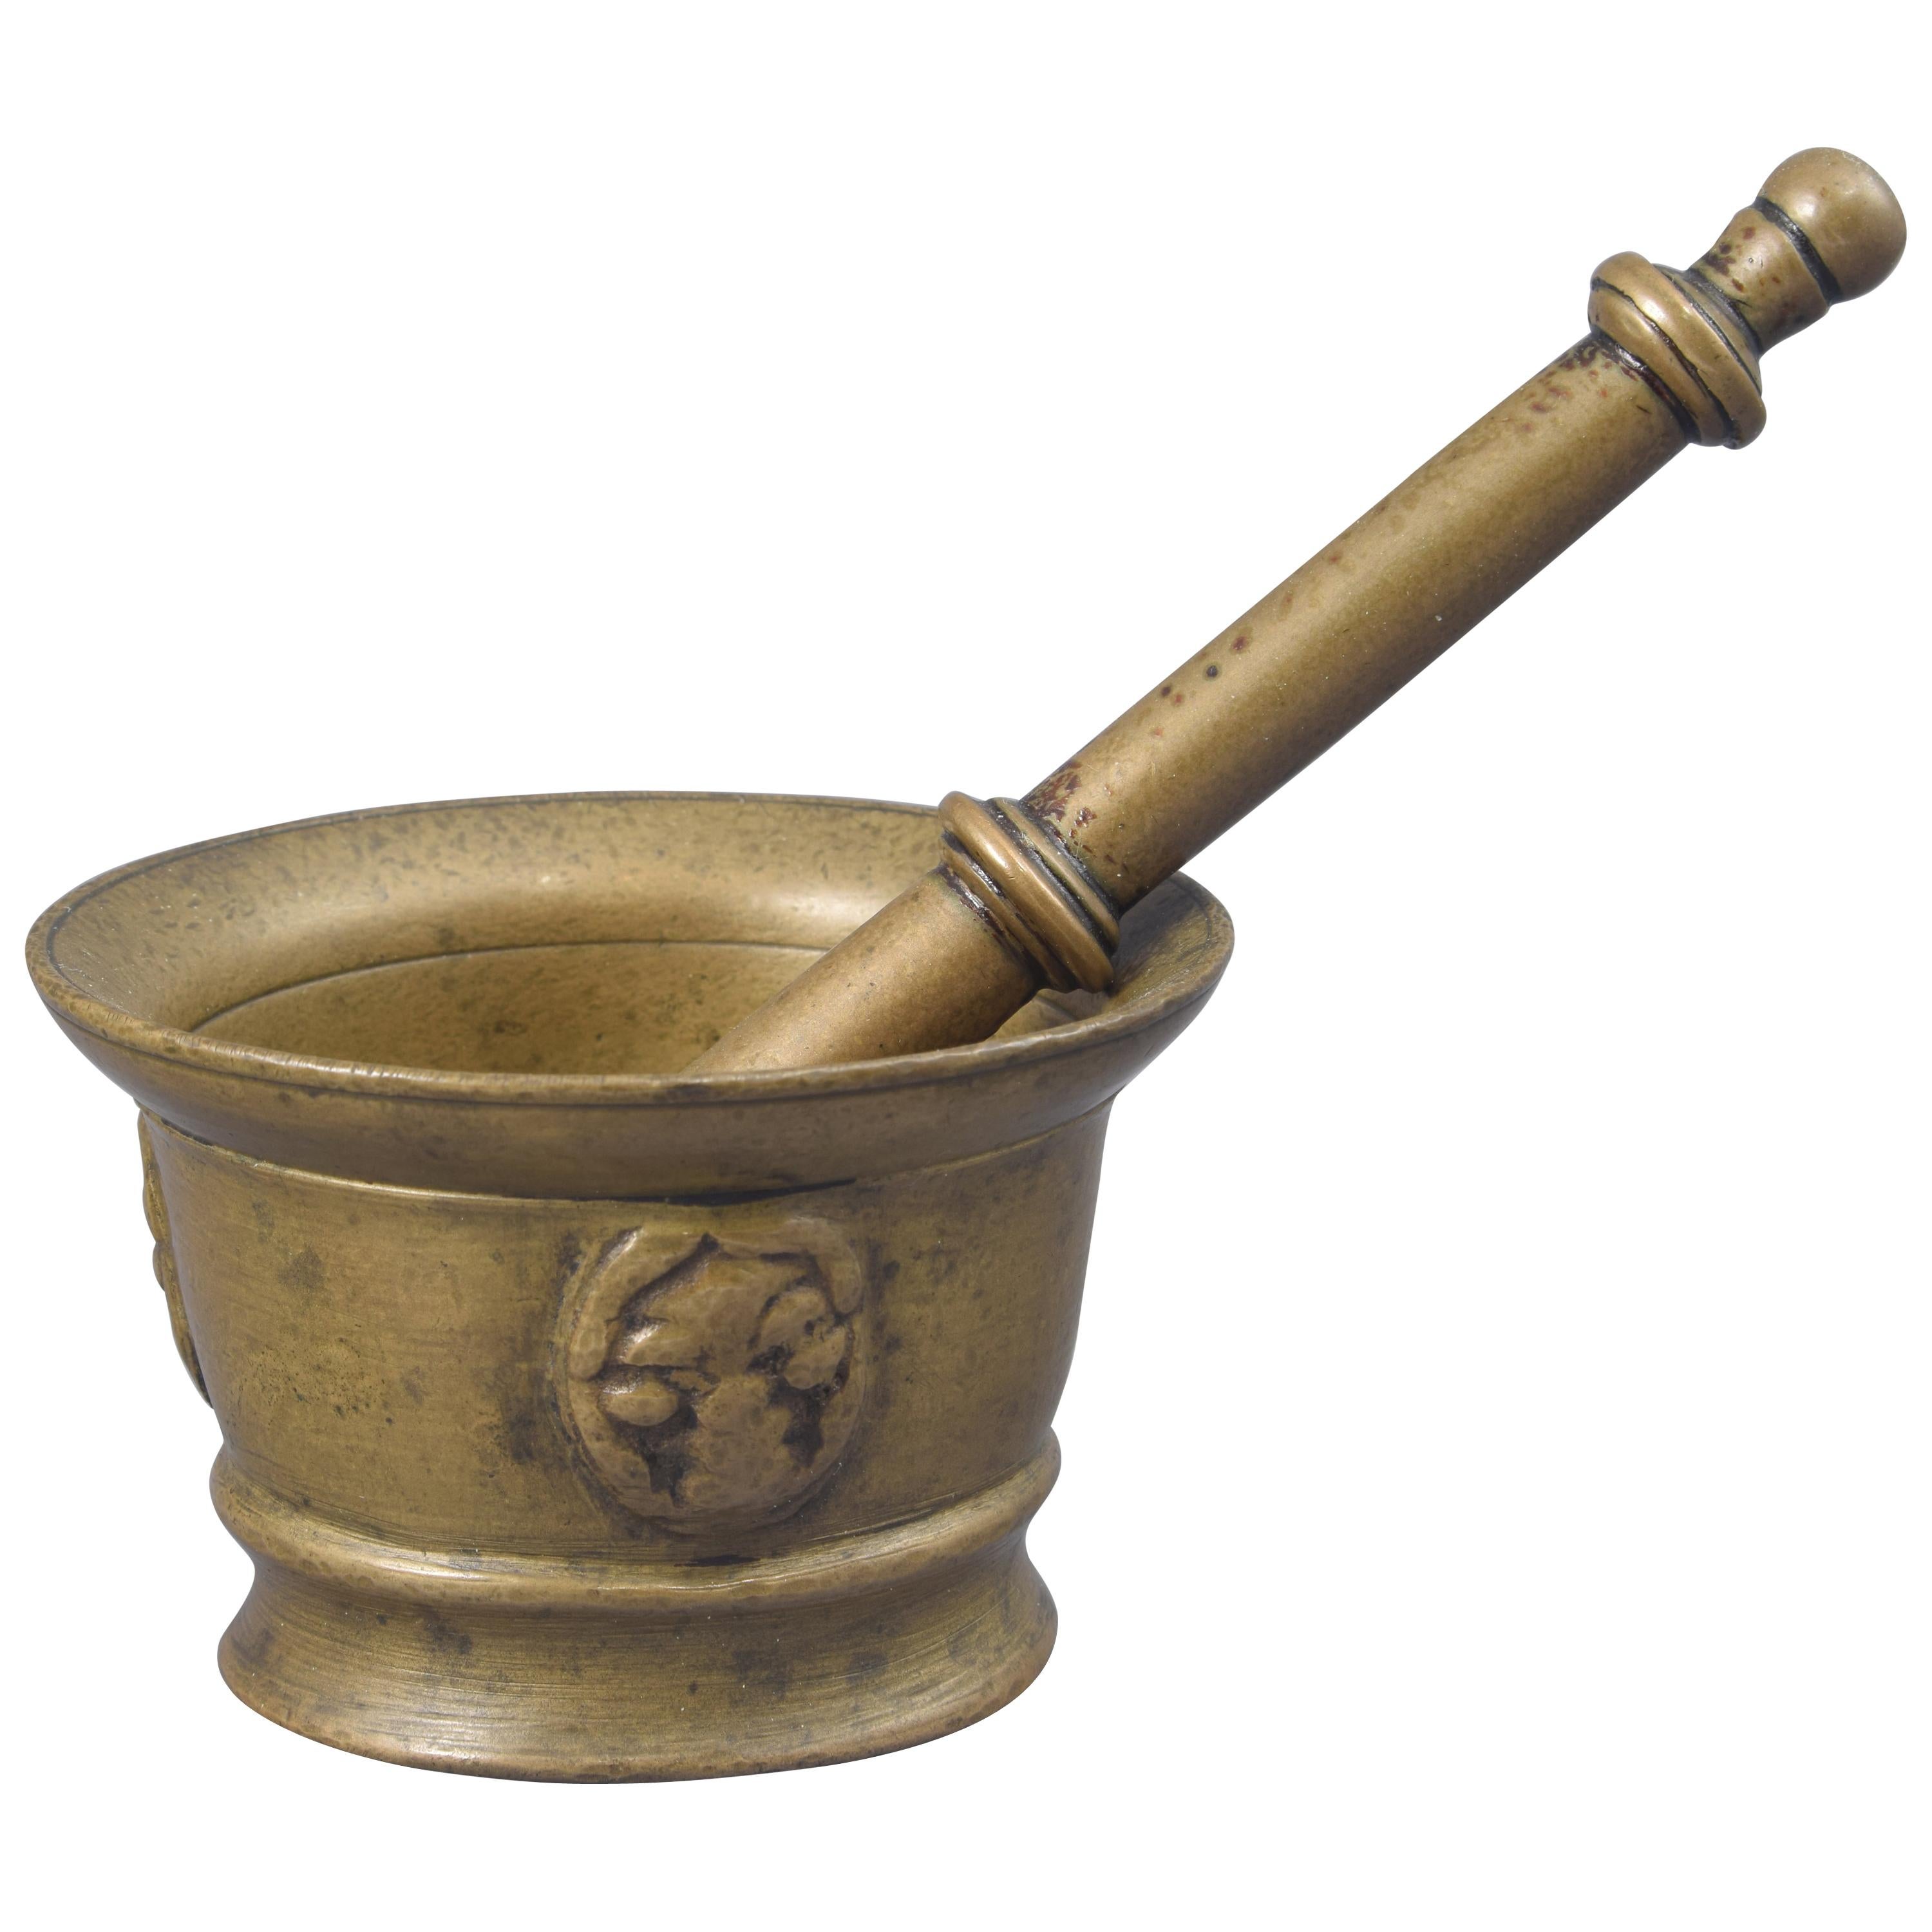 Mortar with Mace or Pestle, Bronze, 17th Century